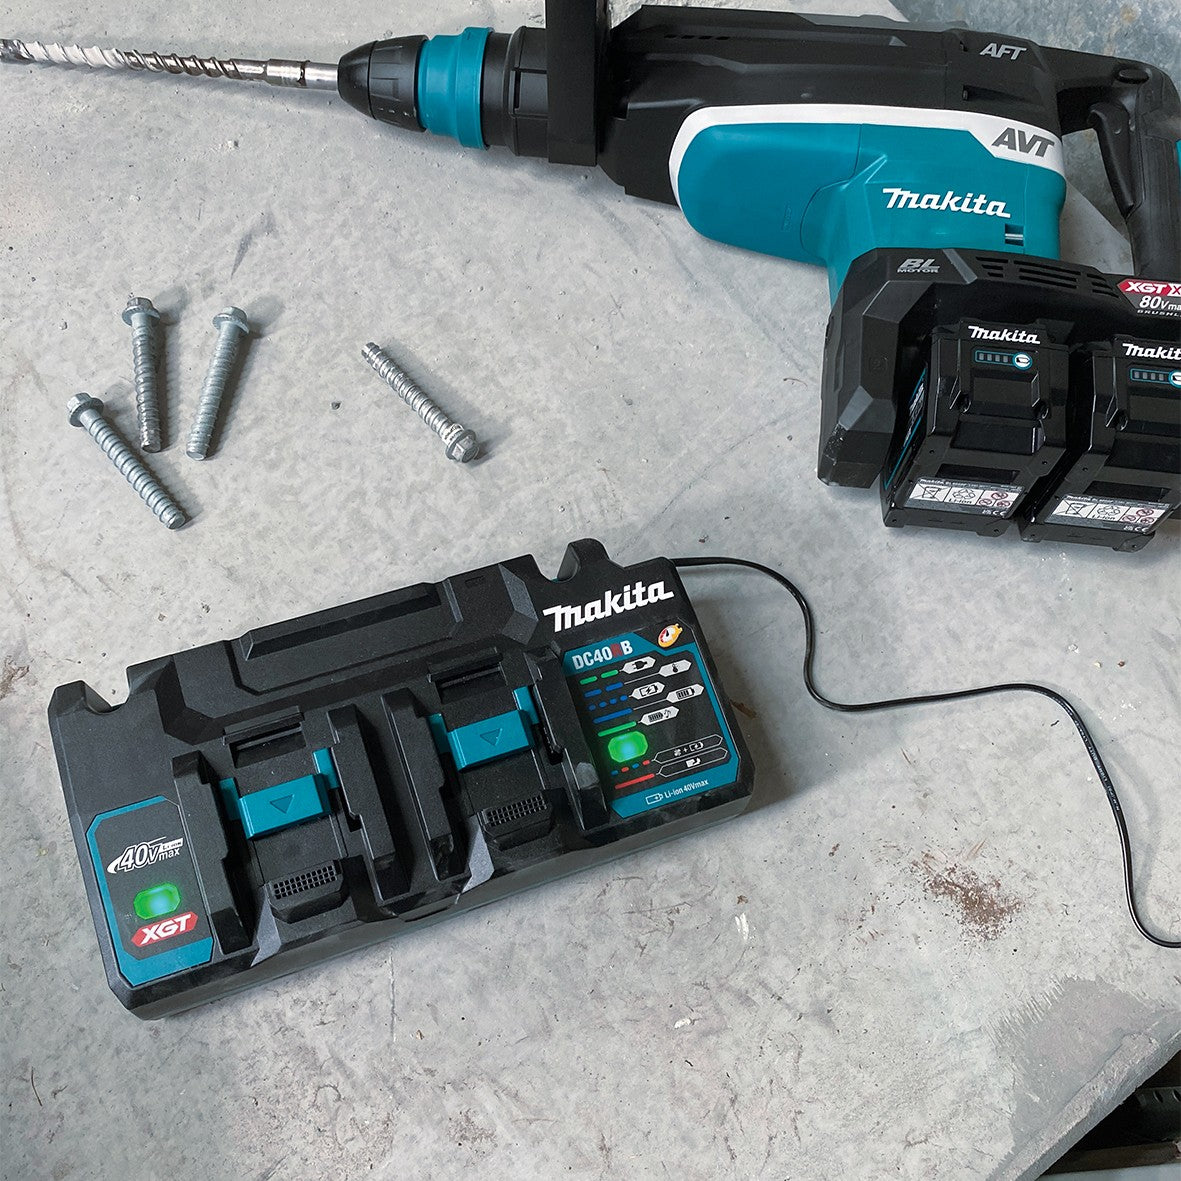 40V Max Dual Port Rapid Charger DC40RB by Makita